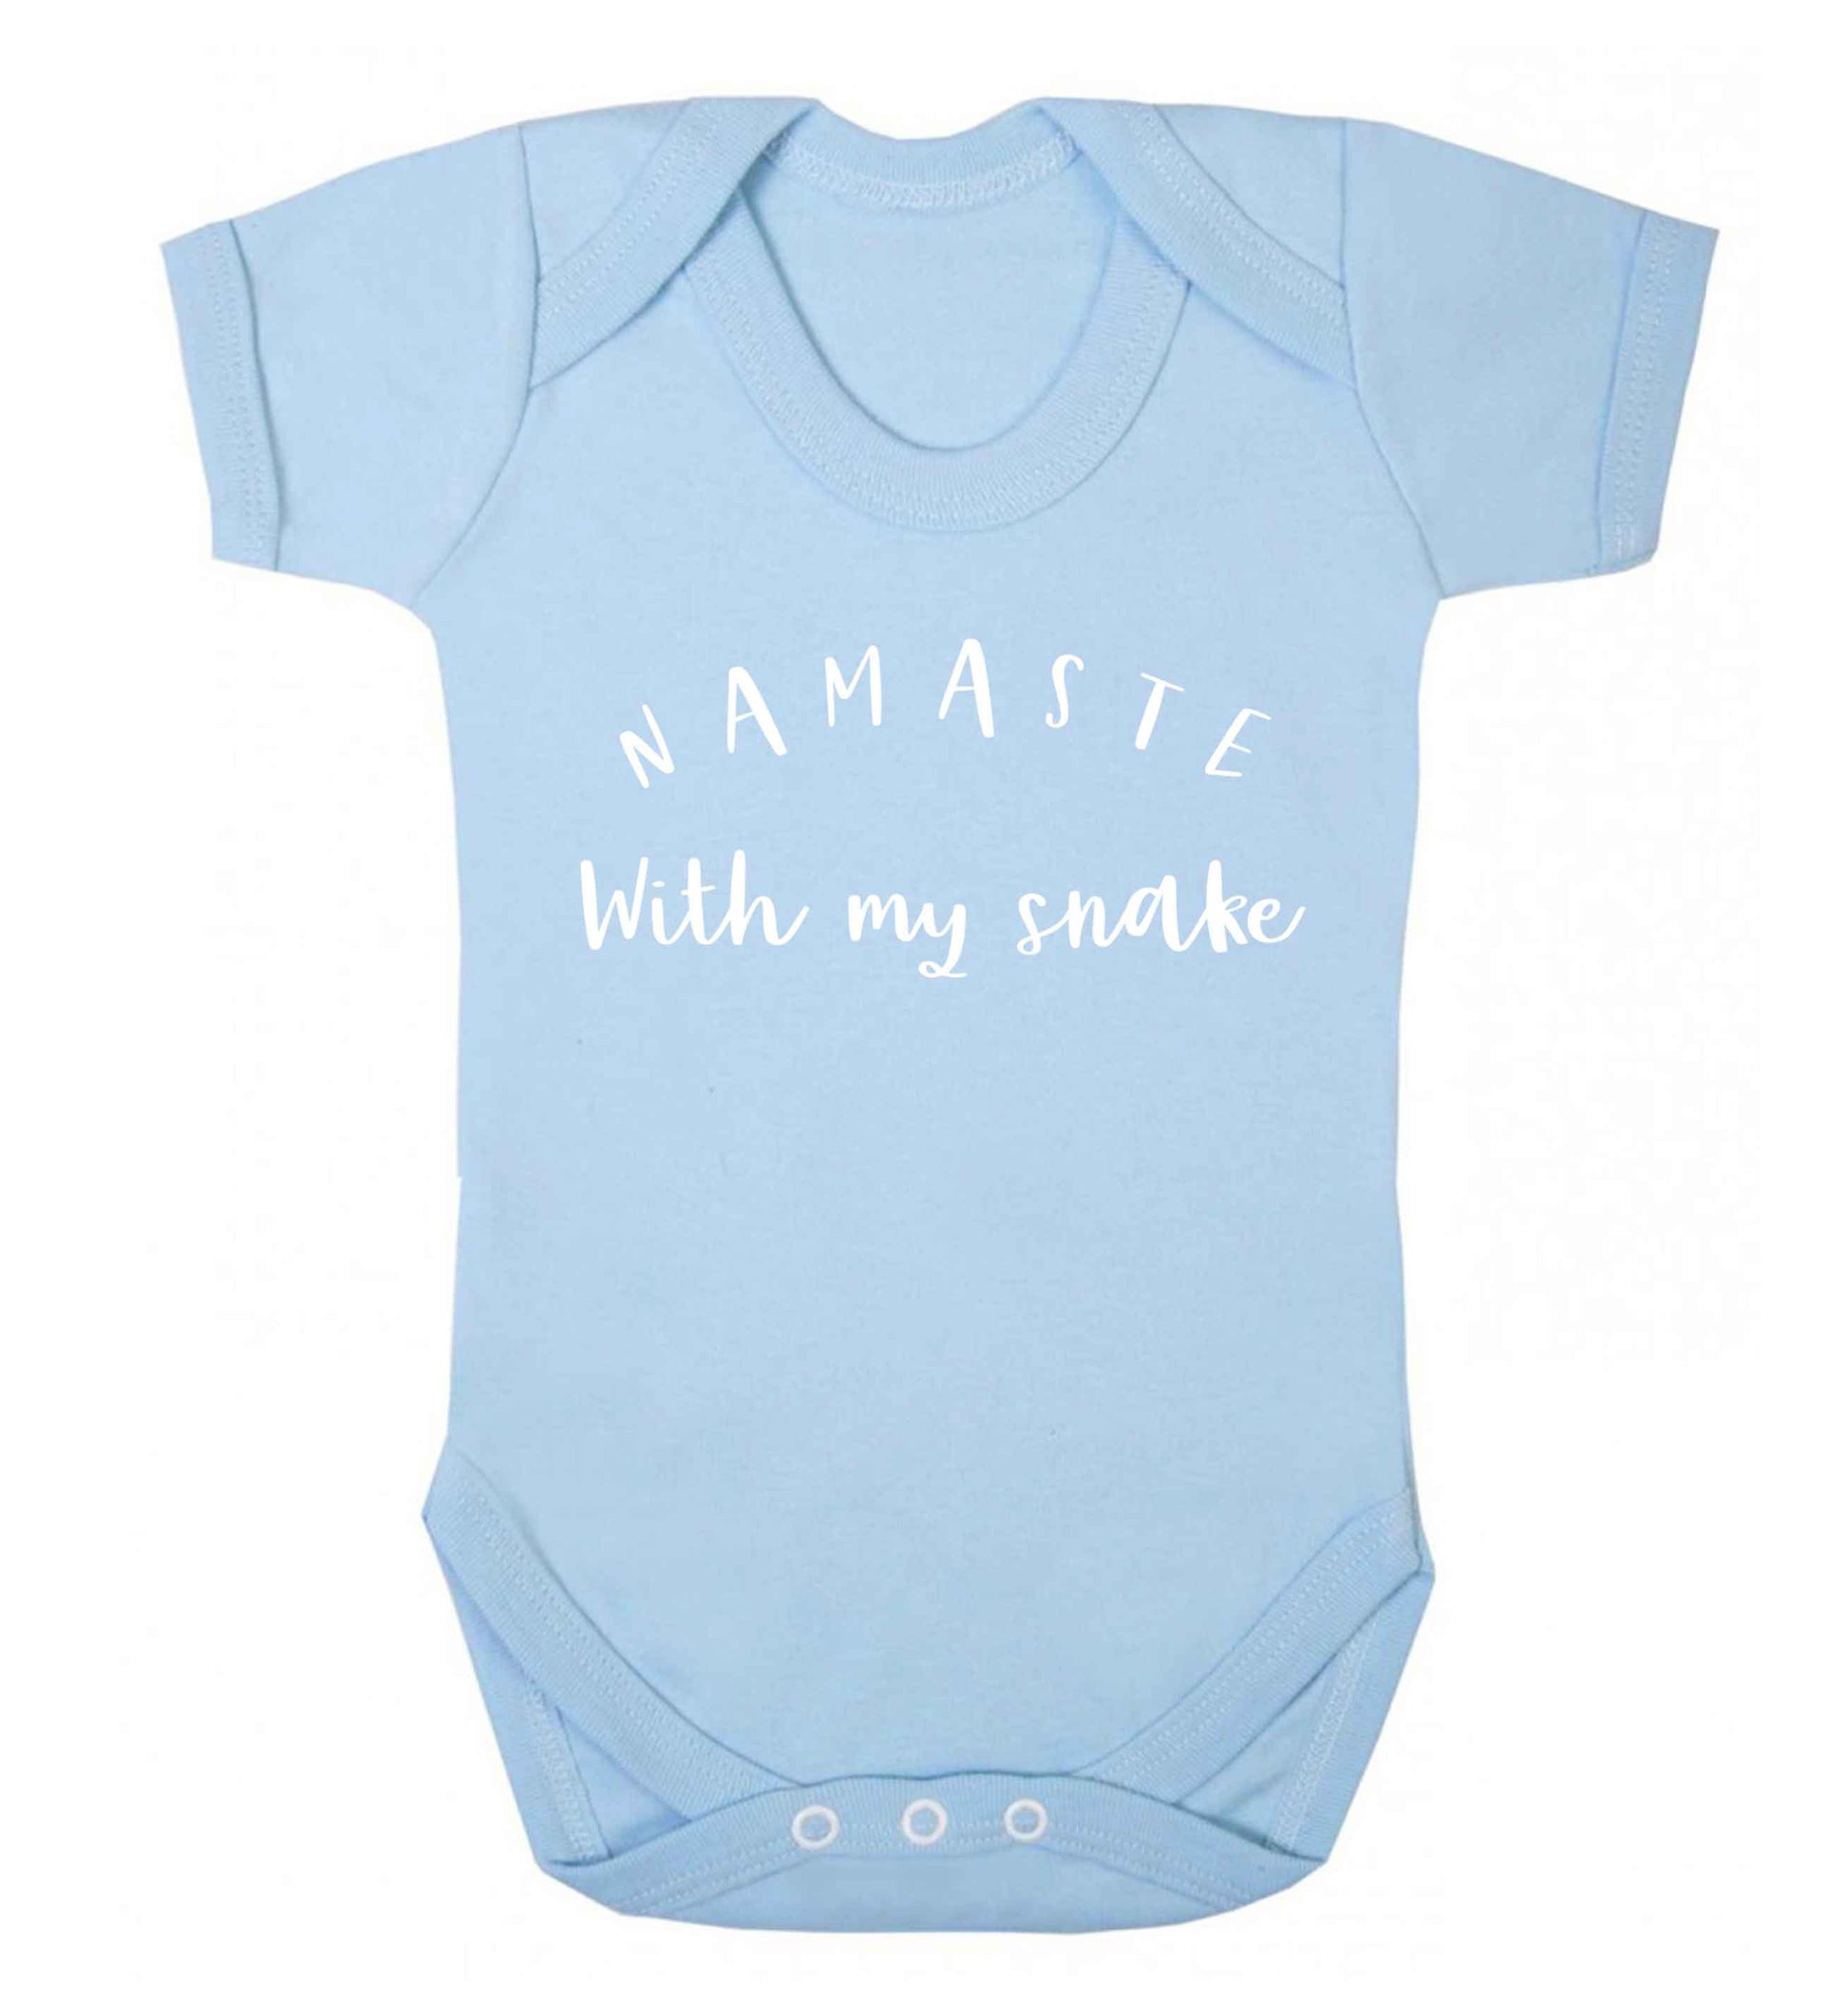 Namaste with my snake Baby Vest pale blue 18-24 months